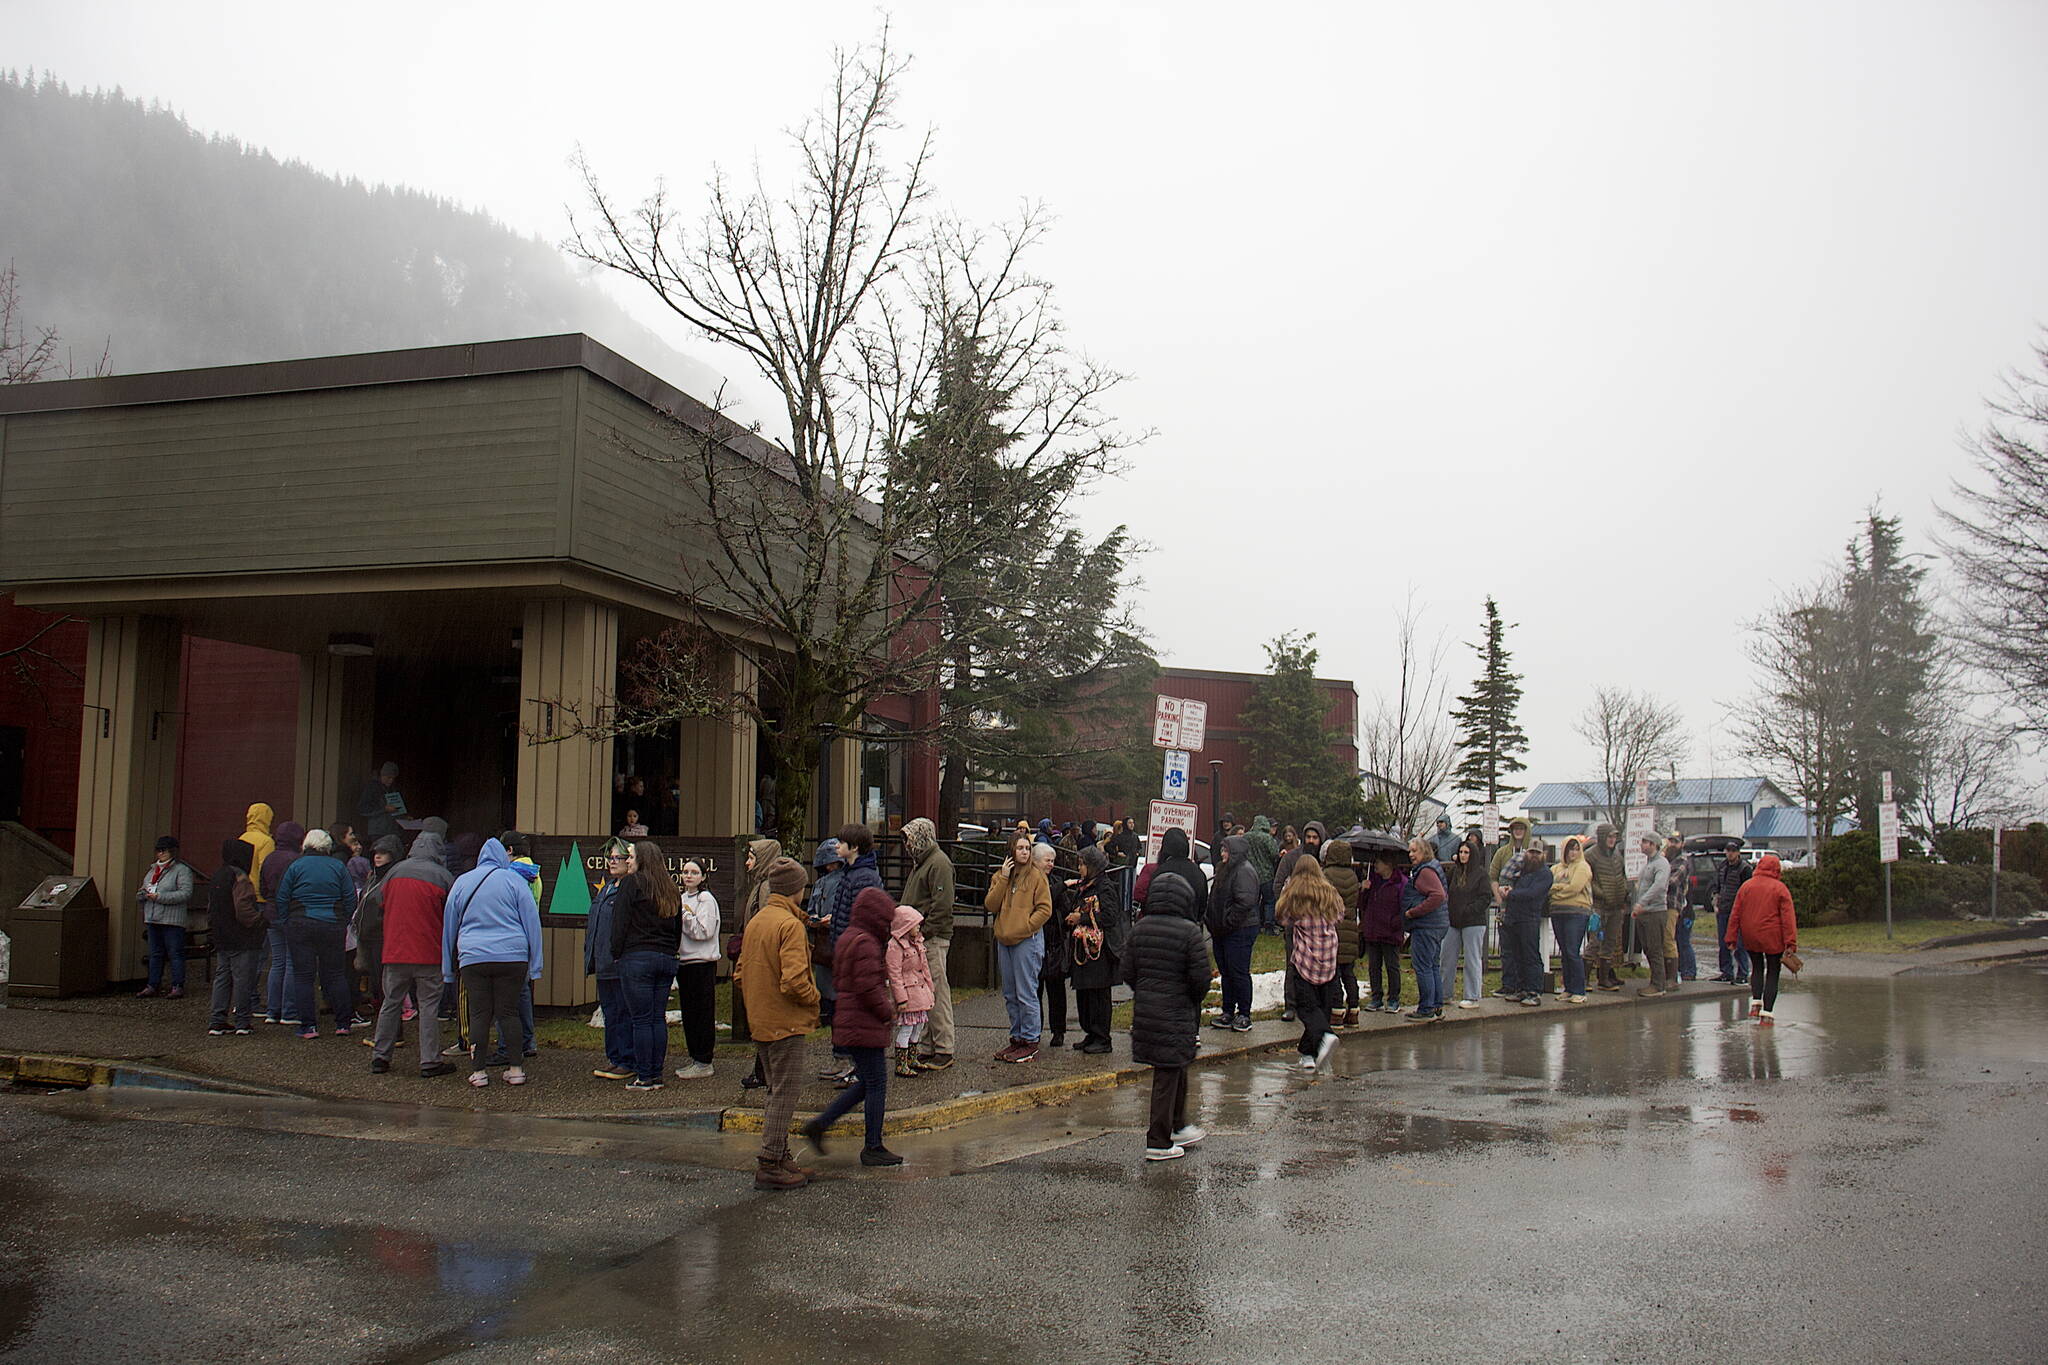 A few dozen people wait in the rain outside Centennial Hall for the start of the Juneau Public Market just before noon on Friday. (Mark Sabbatini / Juneau Empire)